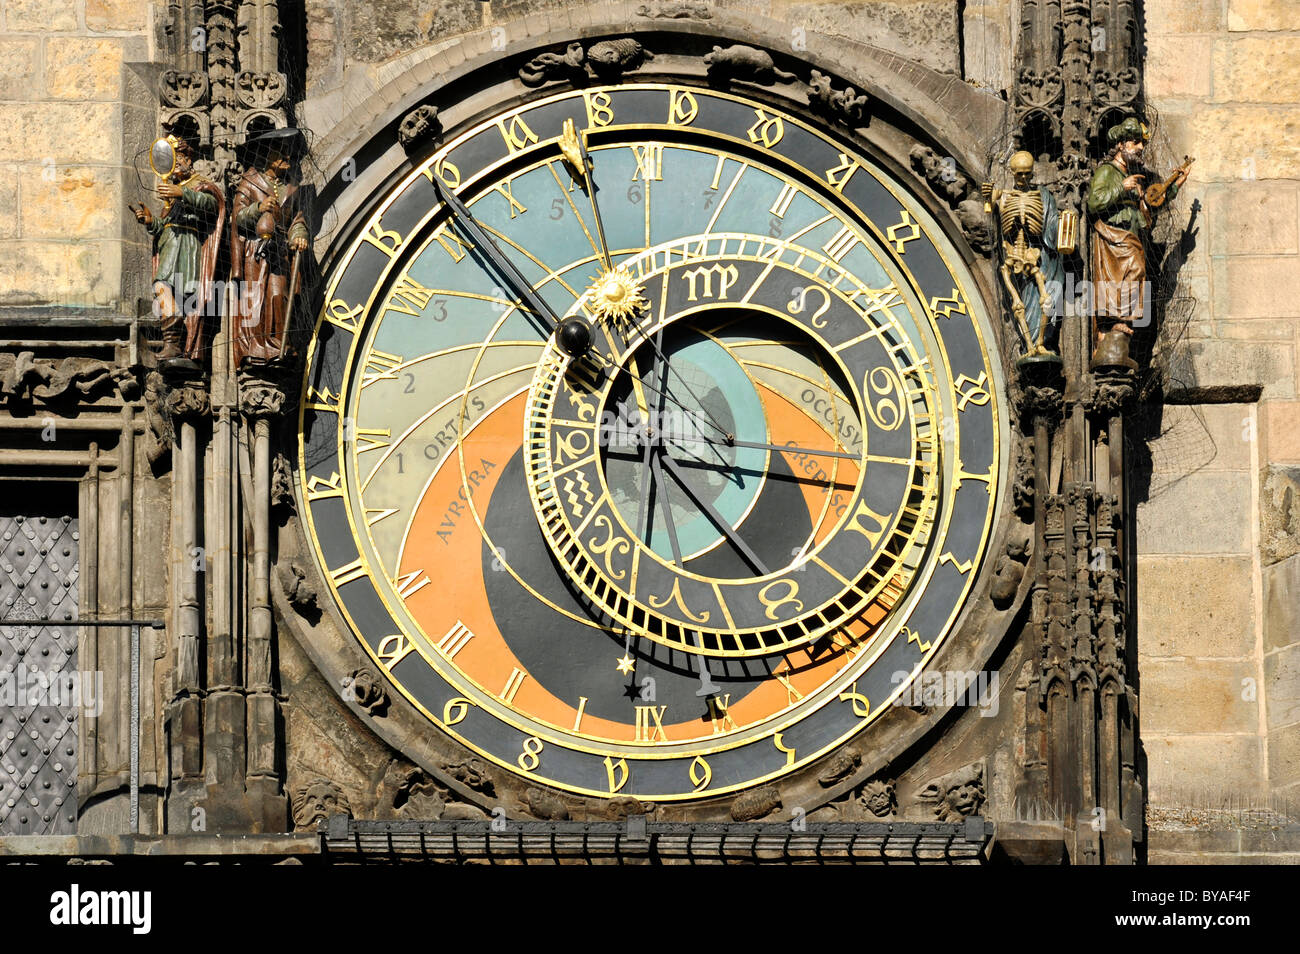 Astronomical dial of the Prague Astronomical Clock on the clock tower of the Old Town City Hall, Old Town Square Stock Photo